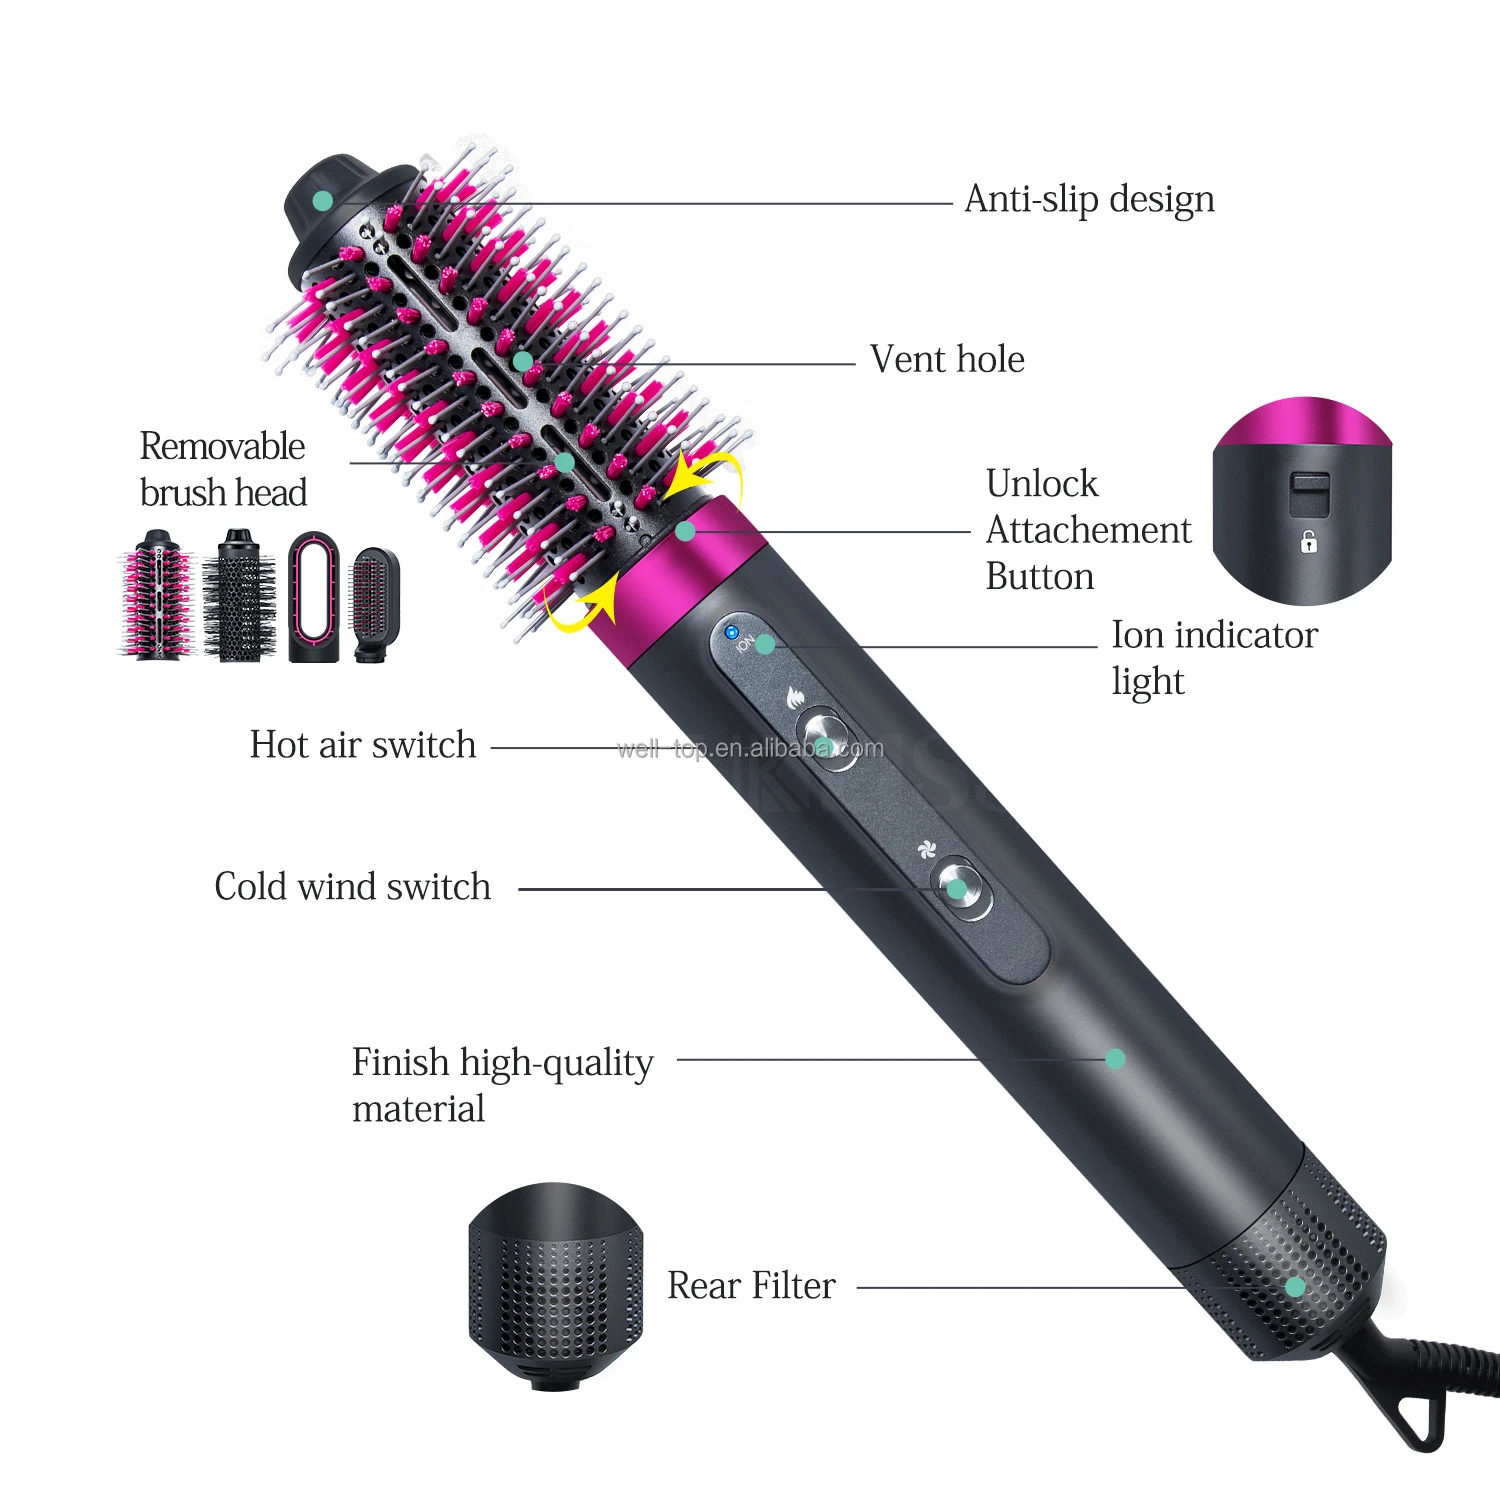 Amazon Hot Selling Multi-functional Air Wrap Hot Air Brush Private Labeling 5 In 1 Blow Dryer Comb High Power Hairdryer Blower